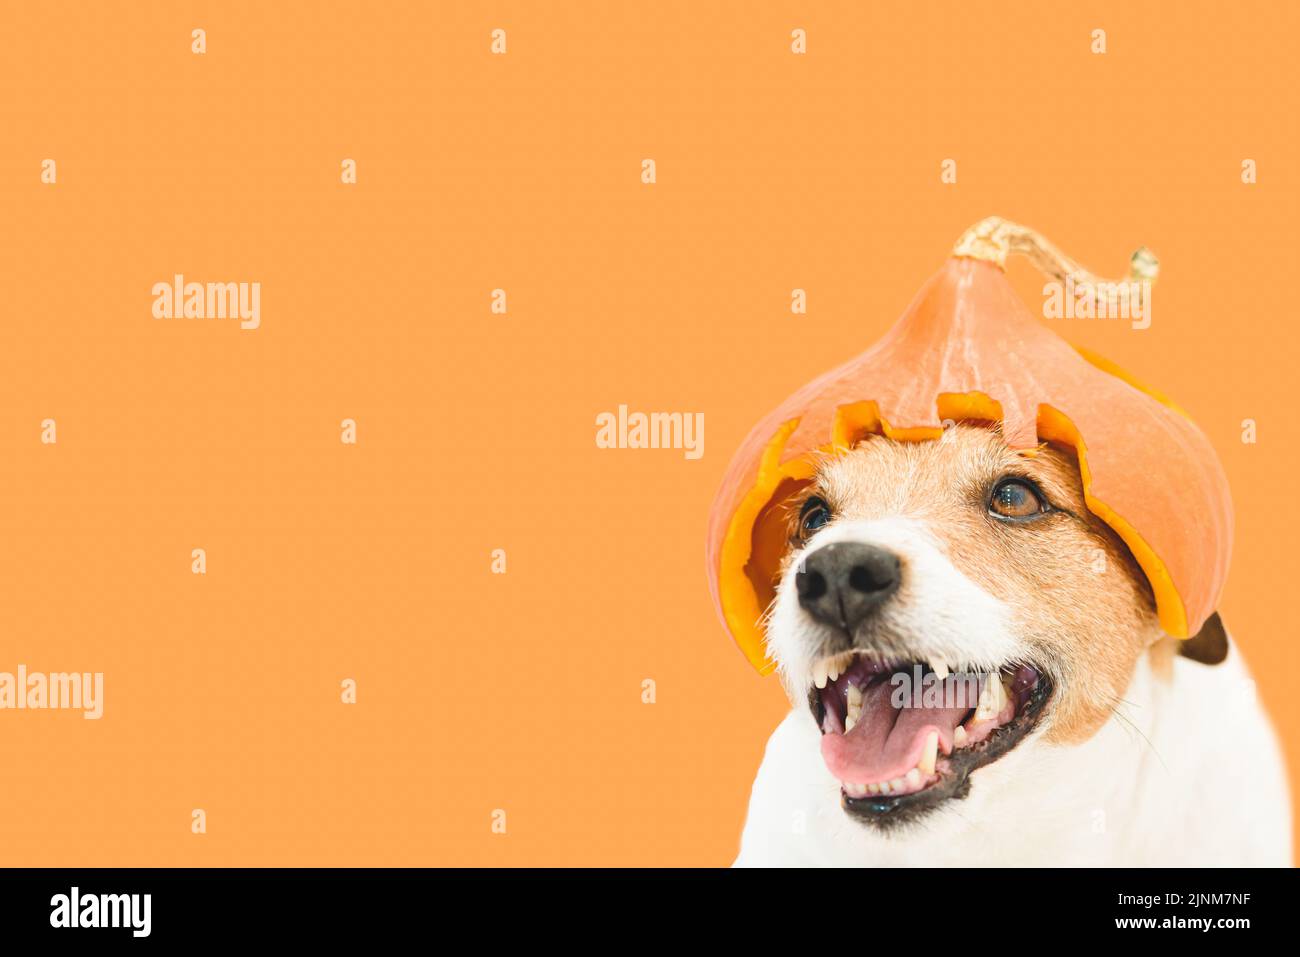 Happy Halloween dog wearing carved pumpkin hat as holiday costume. Smiling and looking up dog on solid color orange background Stock Photo